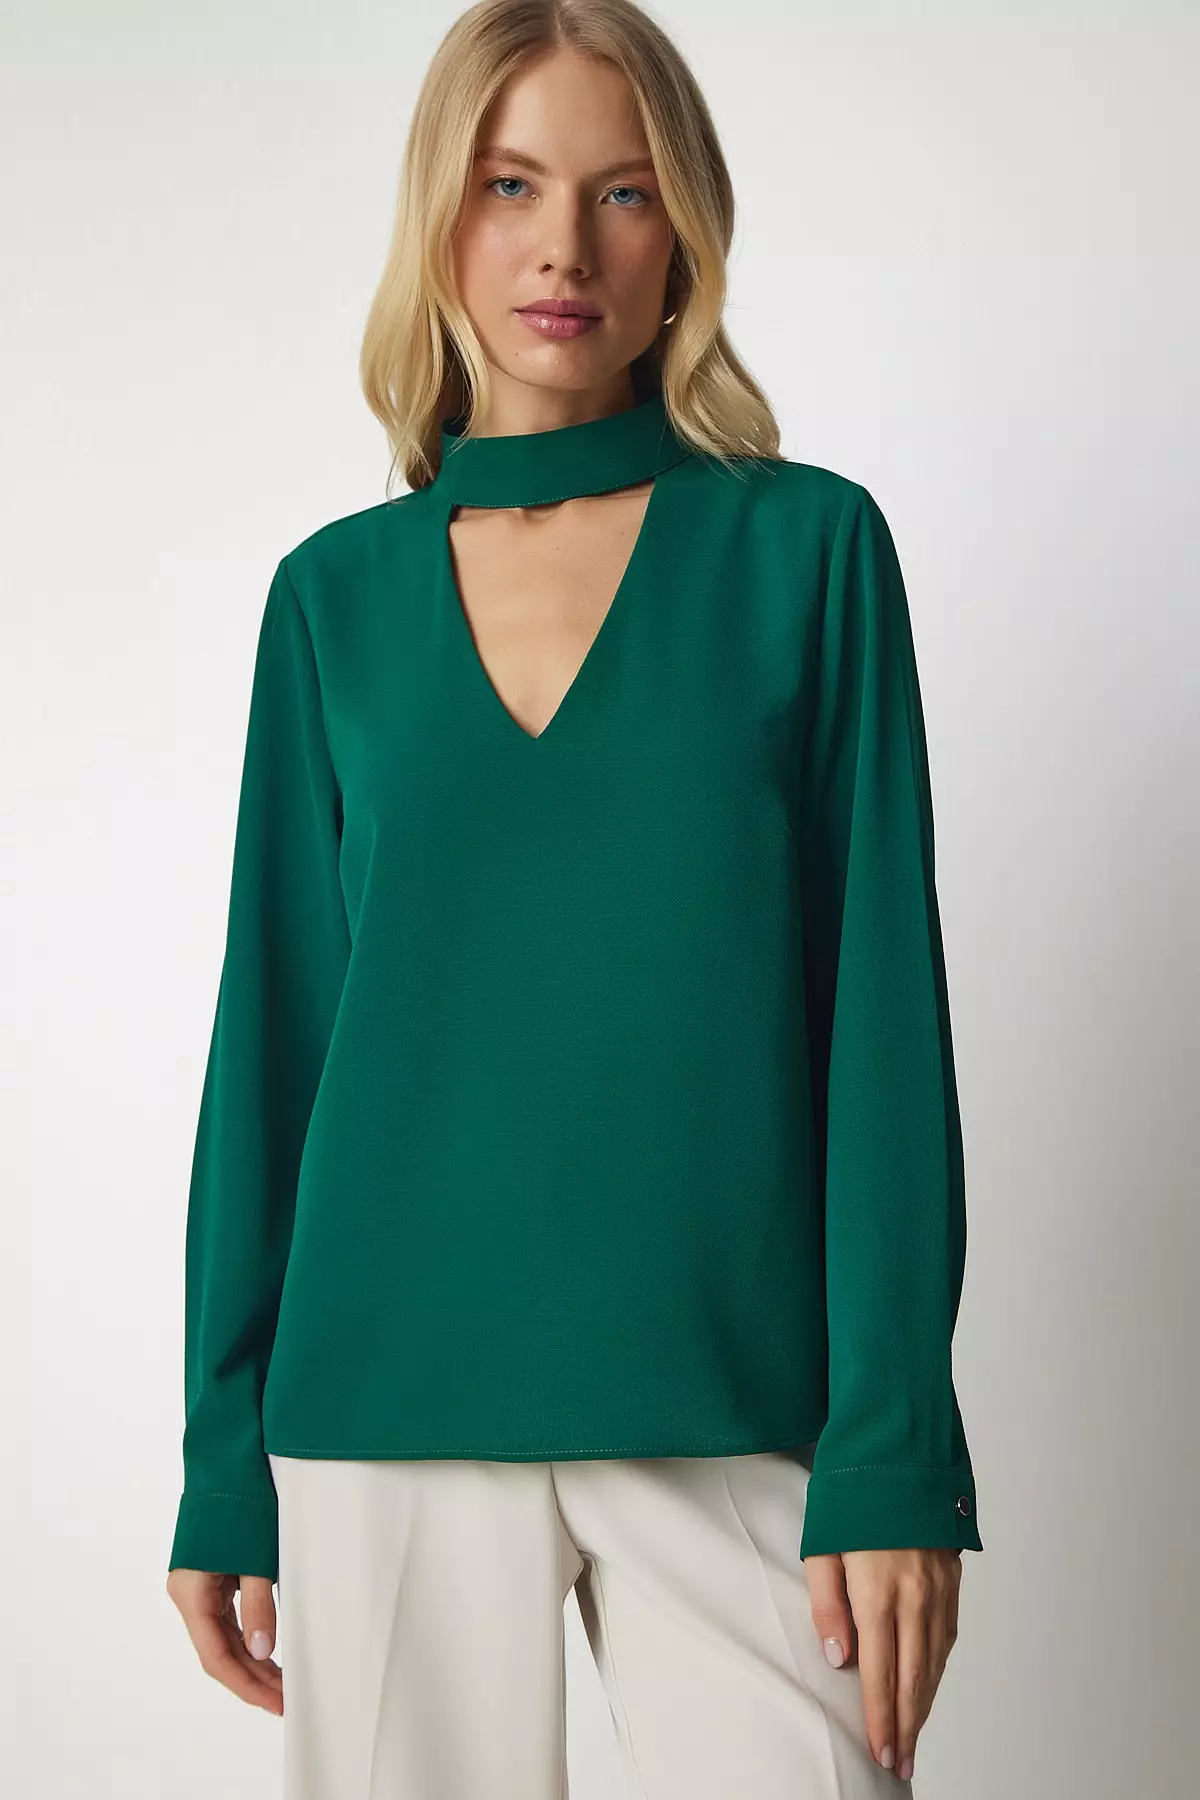 Happiness Istanbul Emerald Green Crepe Blouse with Window Detailed and ...